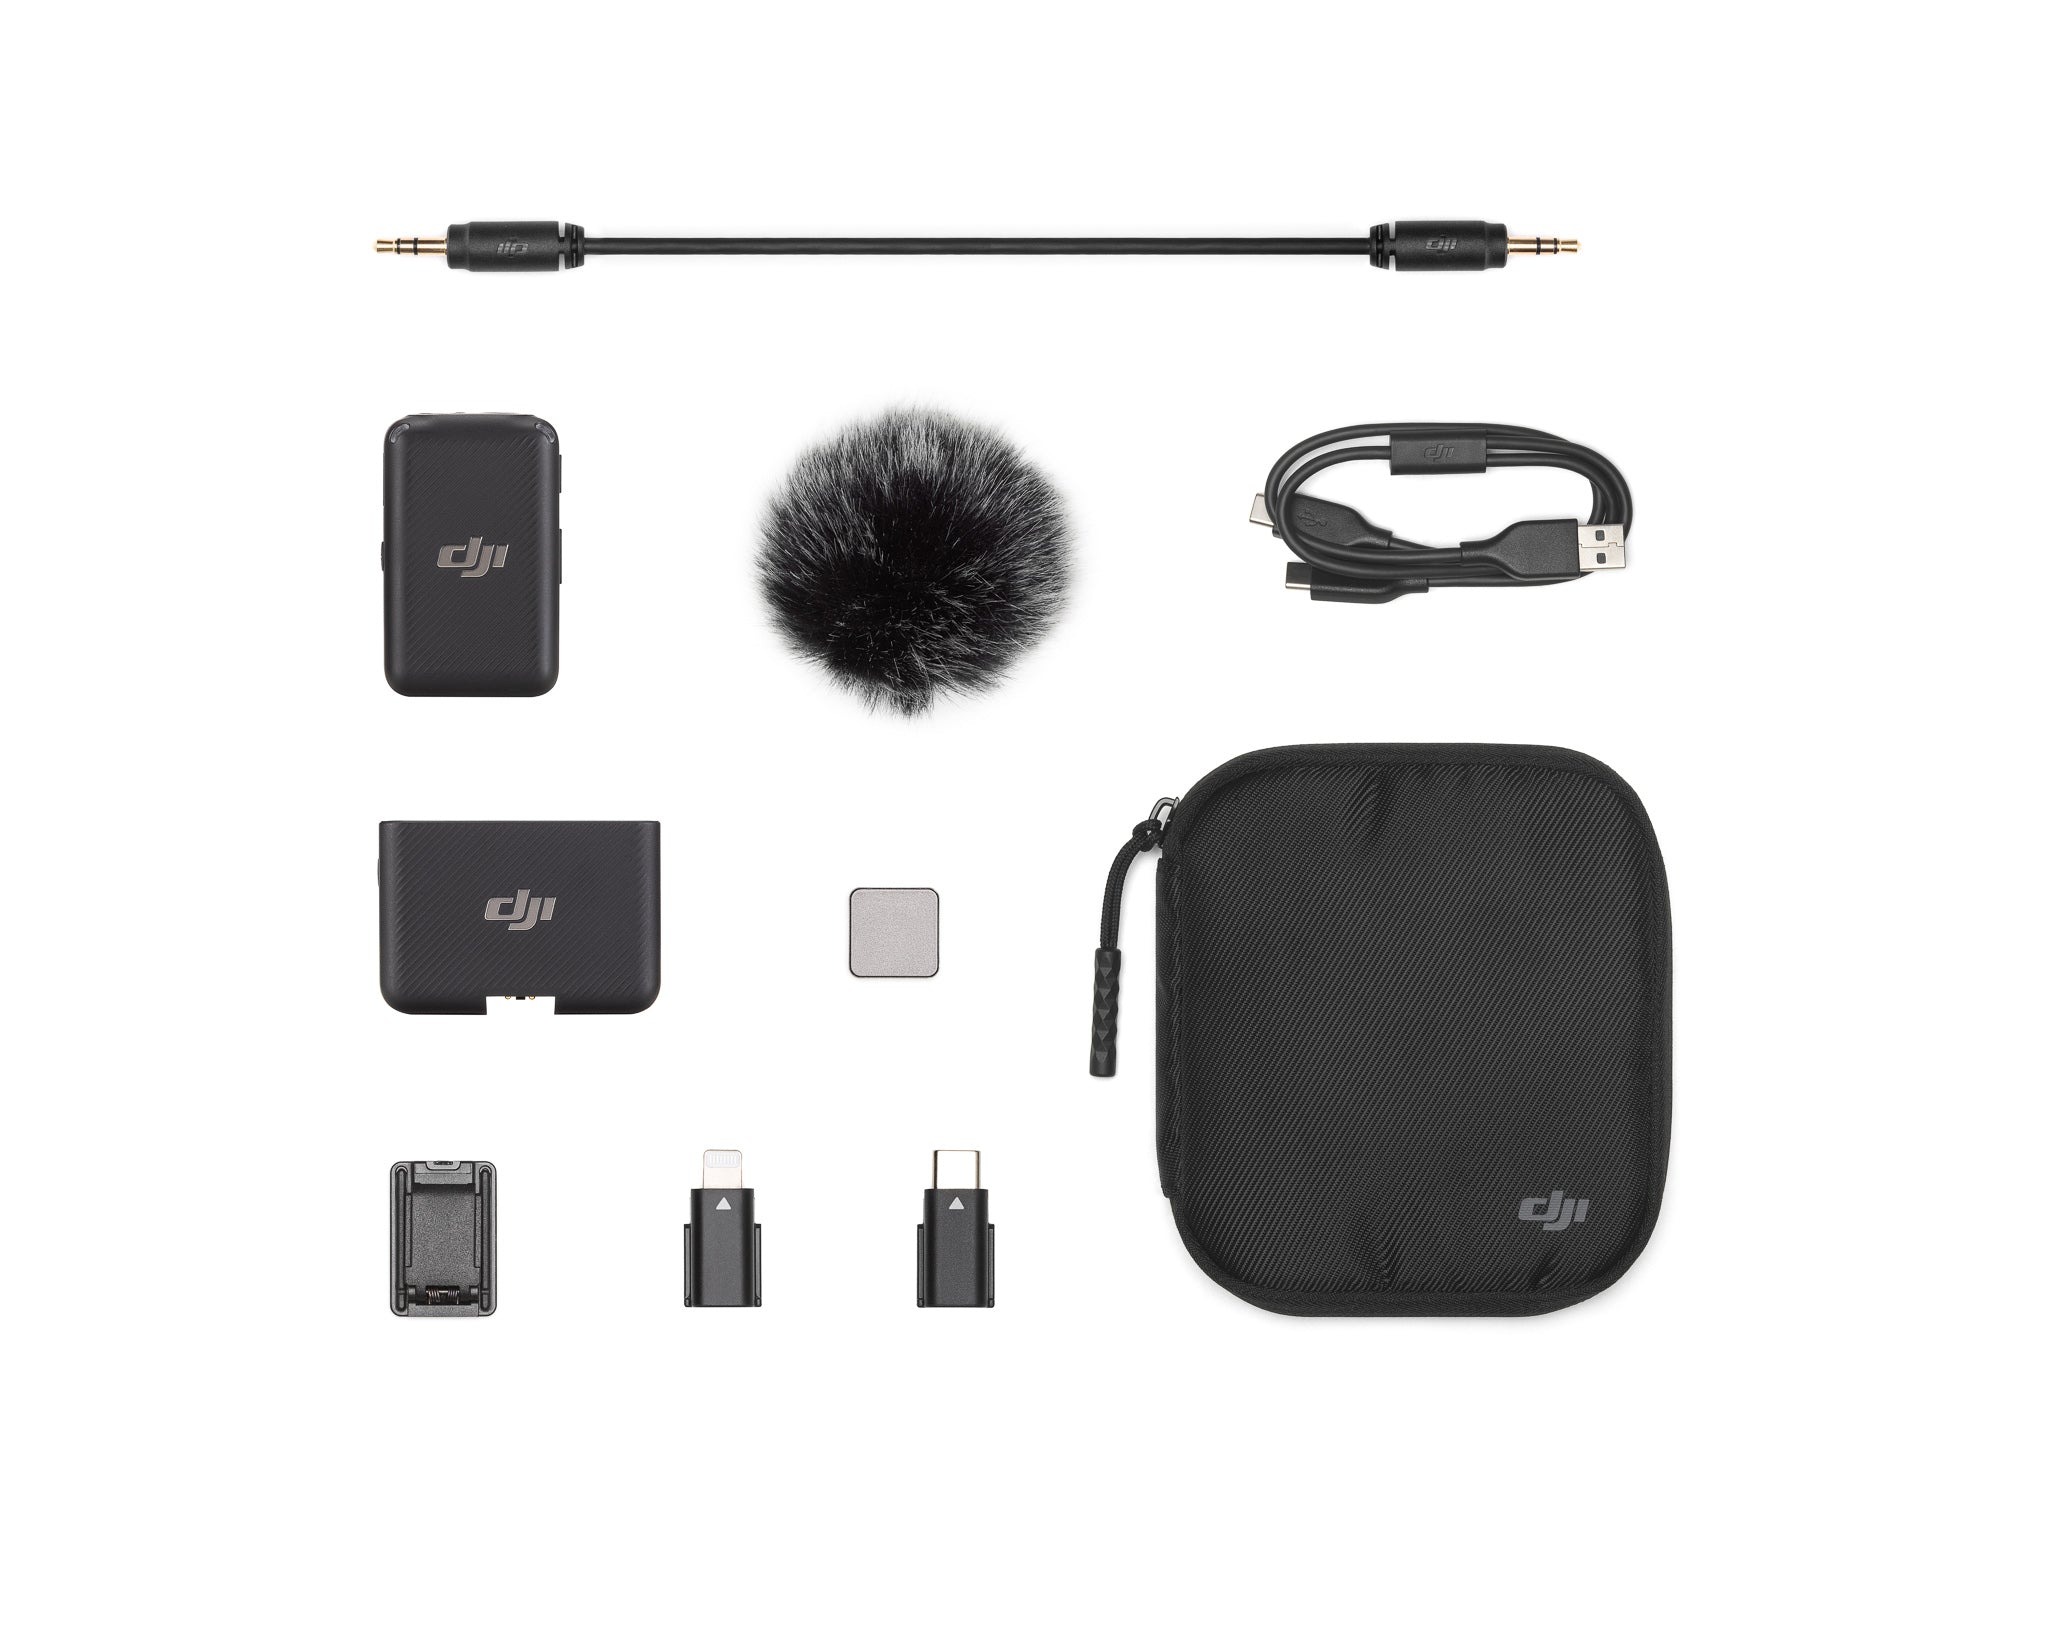 Product Image of DJI Mic Wireless Microphone Kit - (1Tx + 1Rx) Includes 1 Transmitters, 1 Receiver and Charging Case